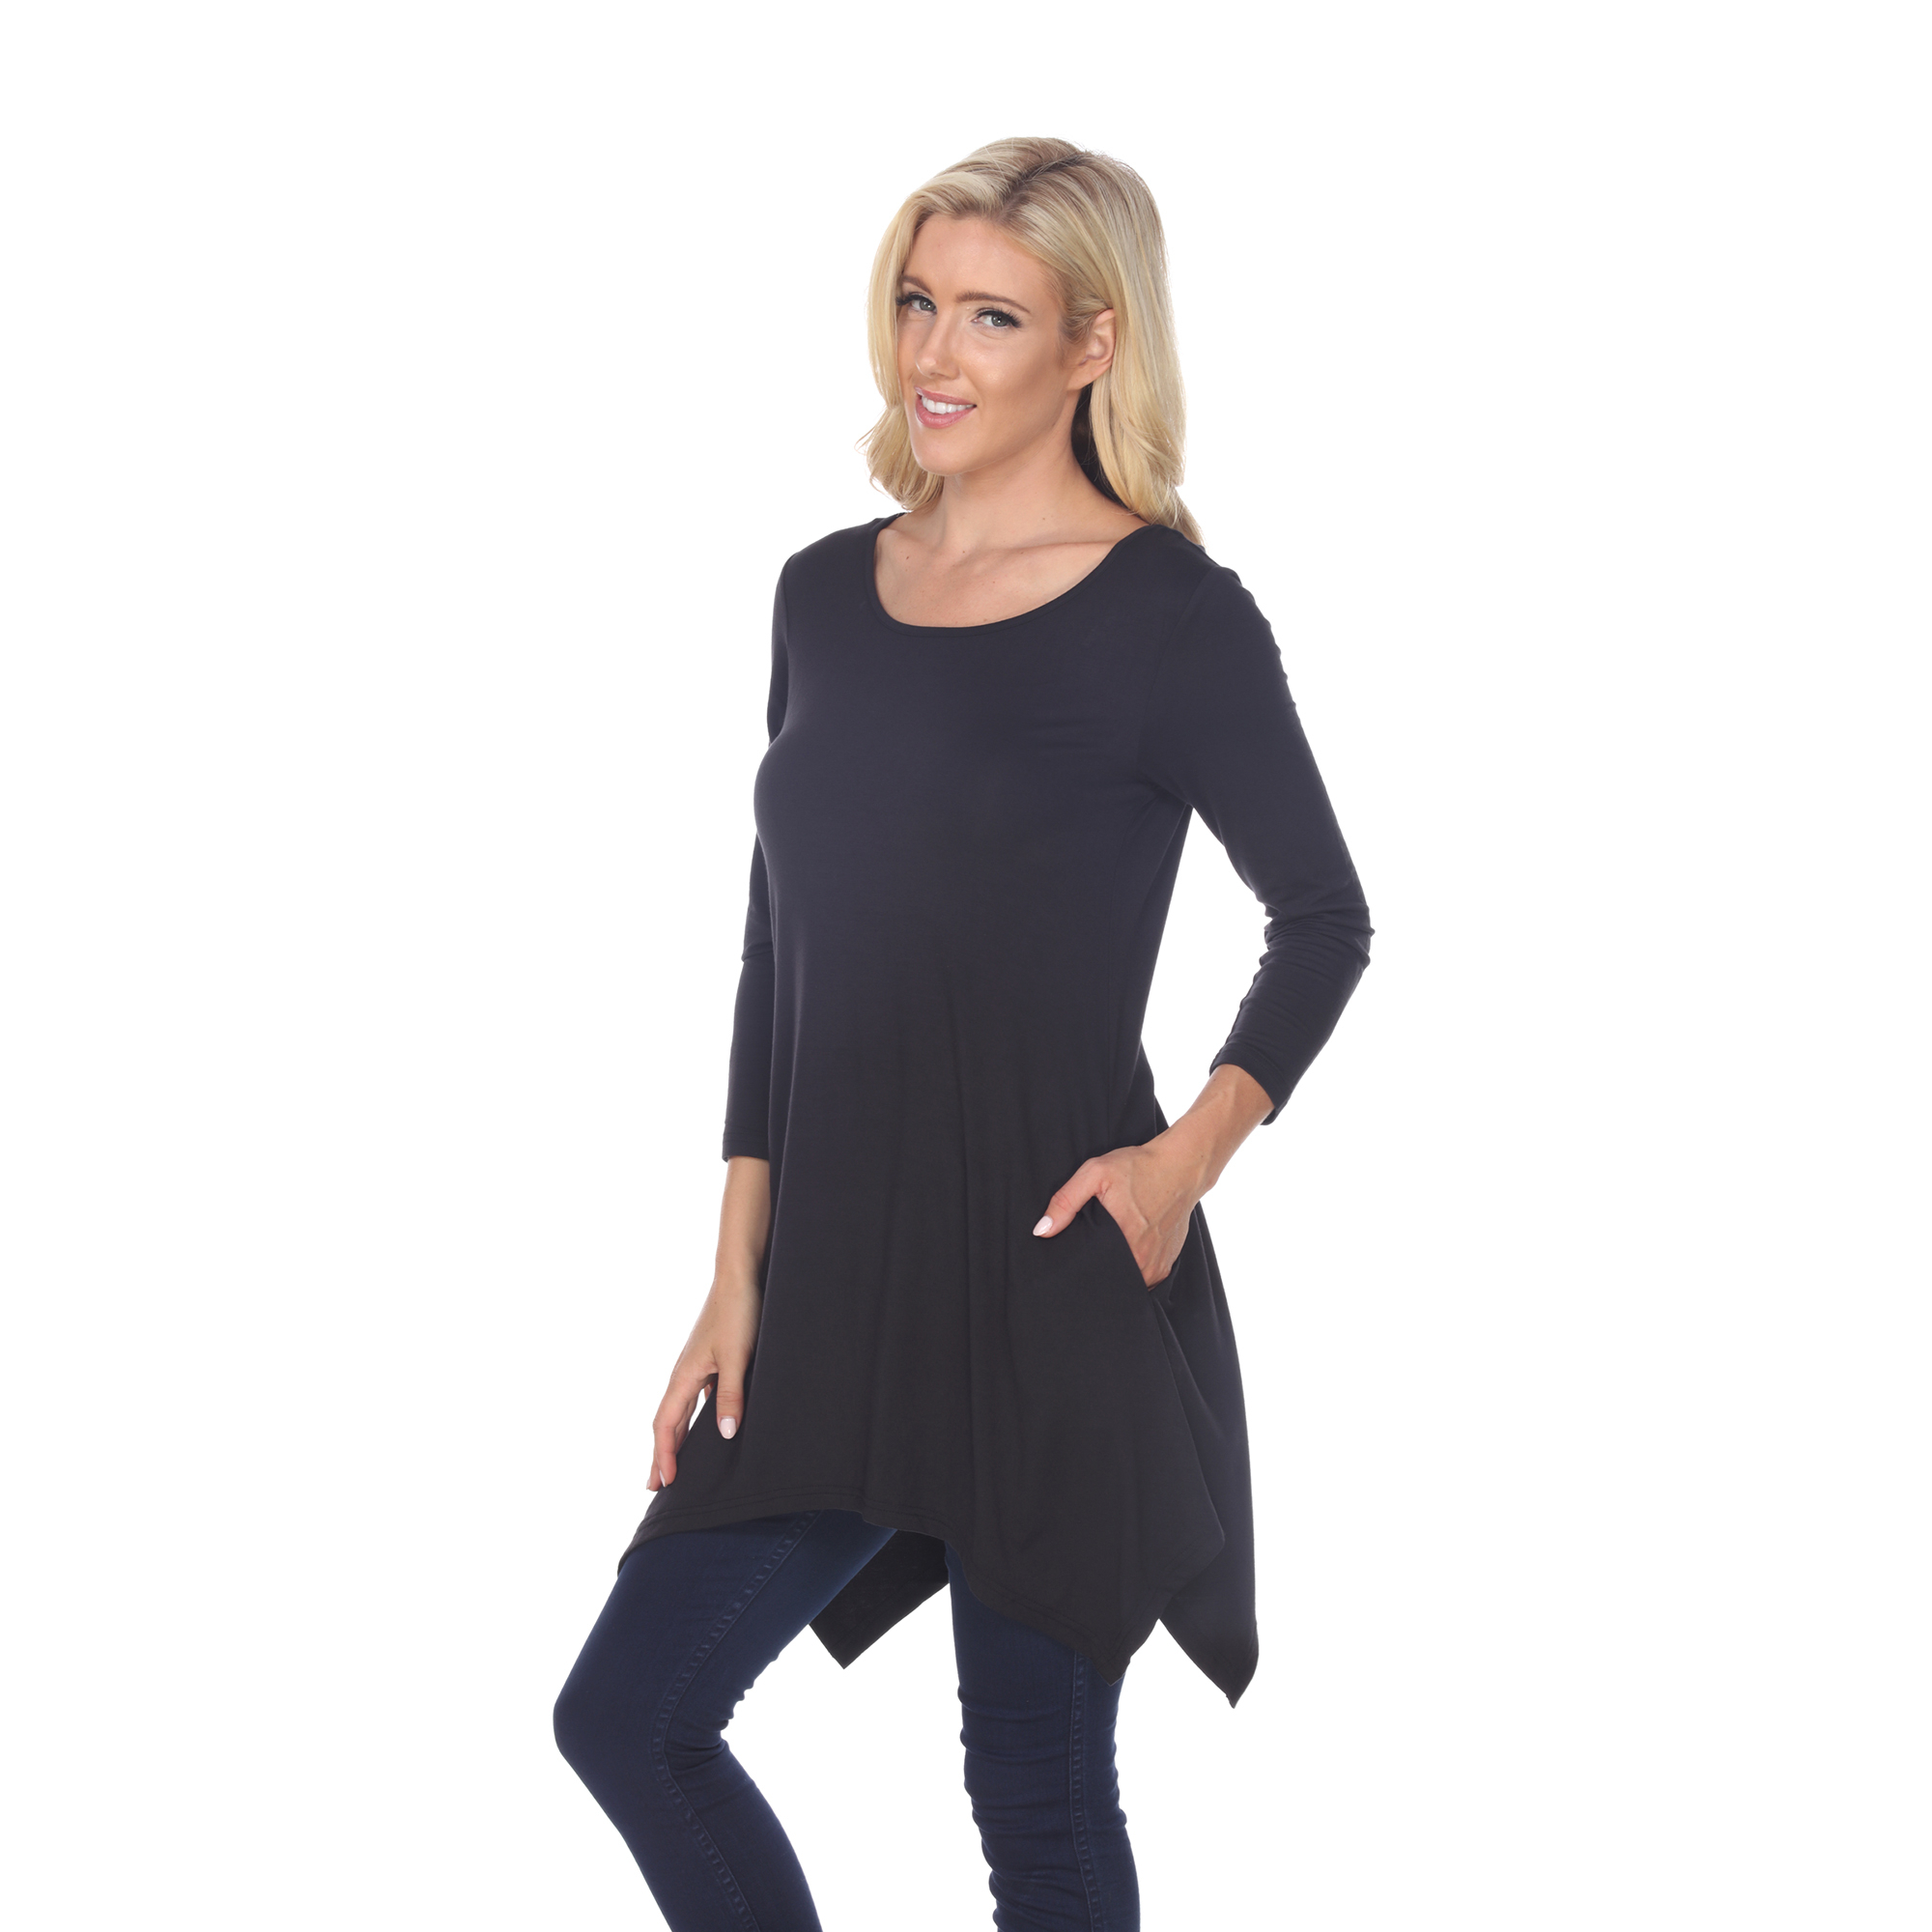 White Mark Women's Quarter Sleeve Tunic Top With Pockets - Charcoal, Small